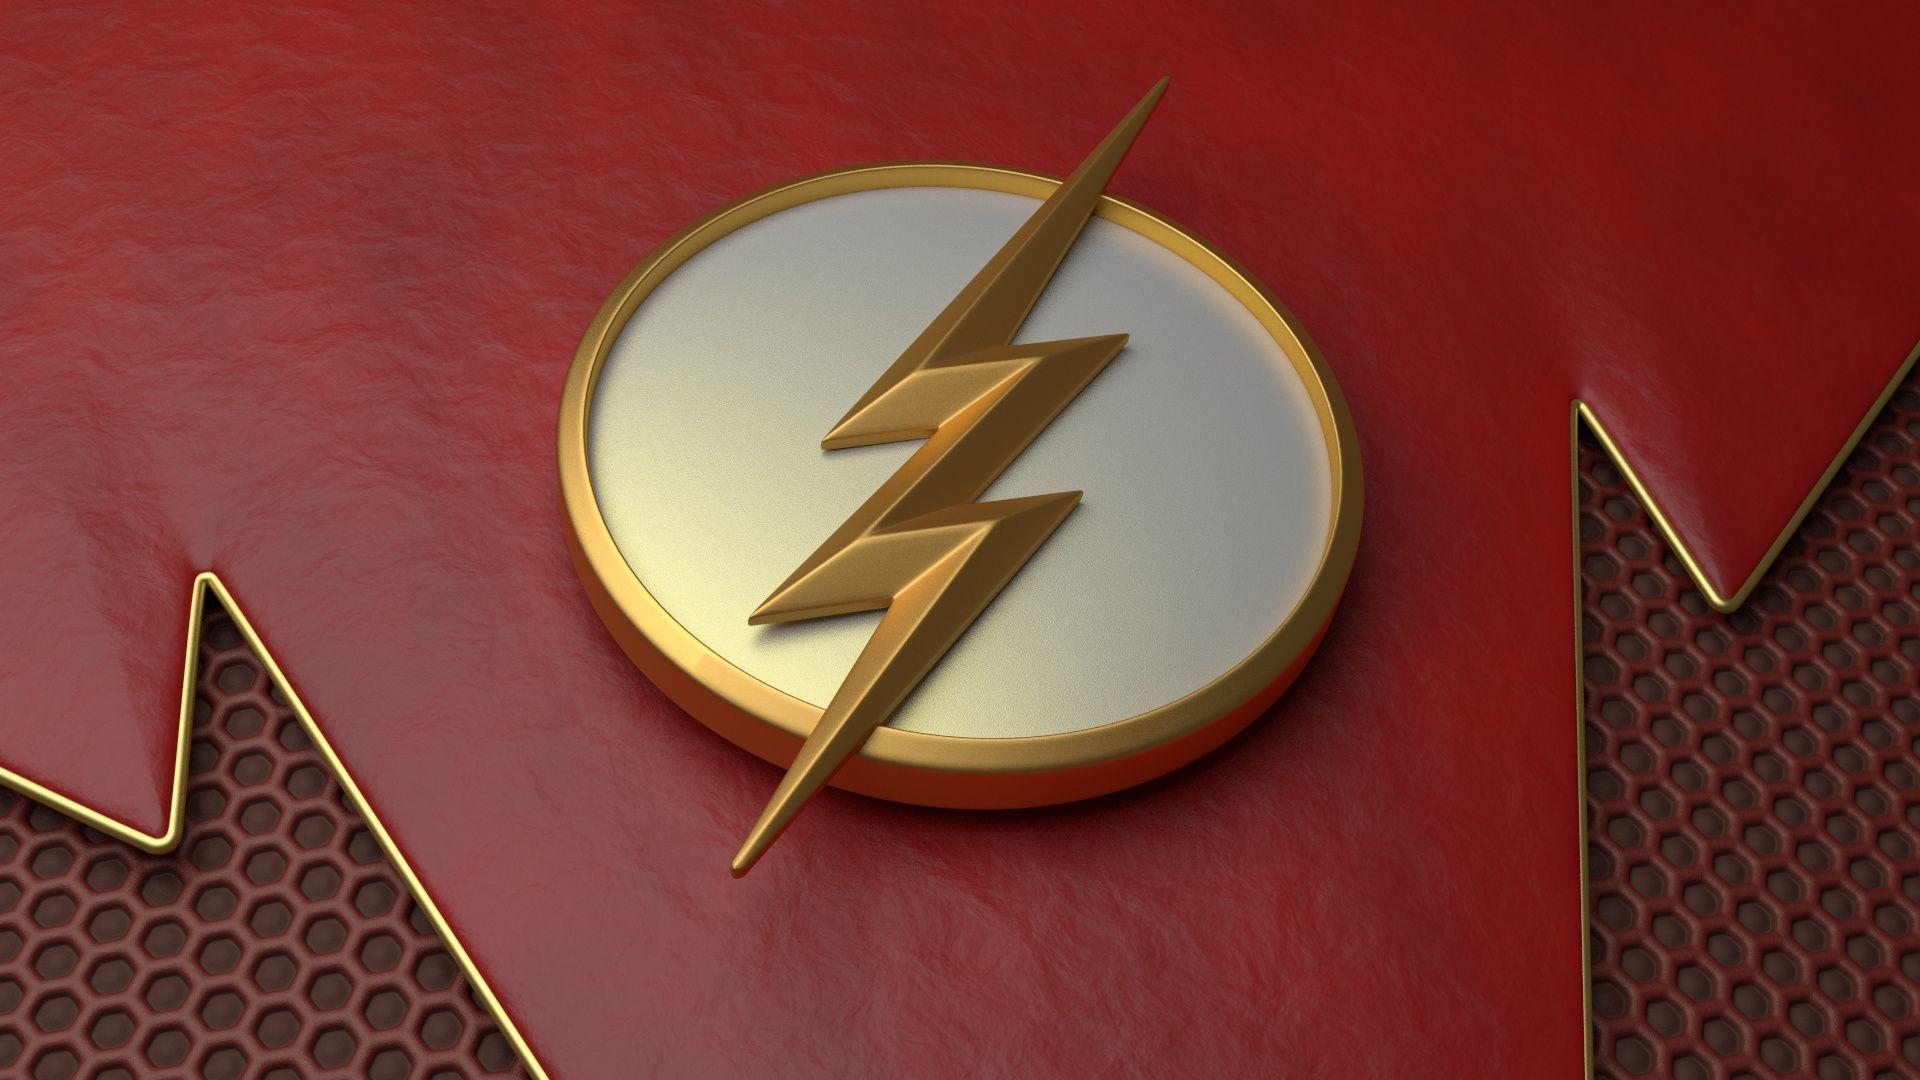 Collection of Flash Logo Wallpaper on HDWallpaper 1920x1080